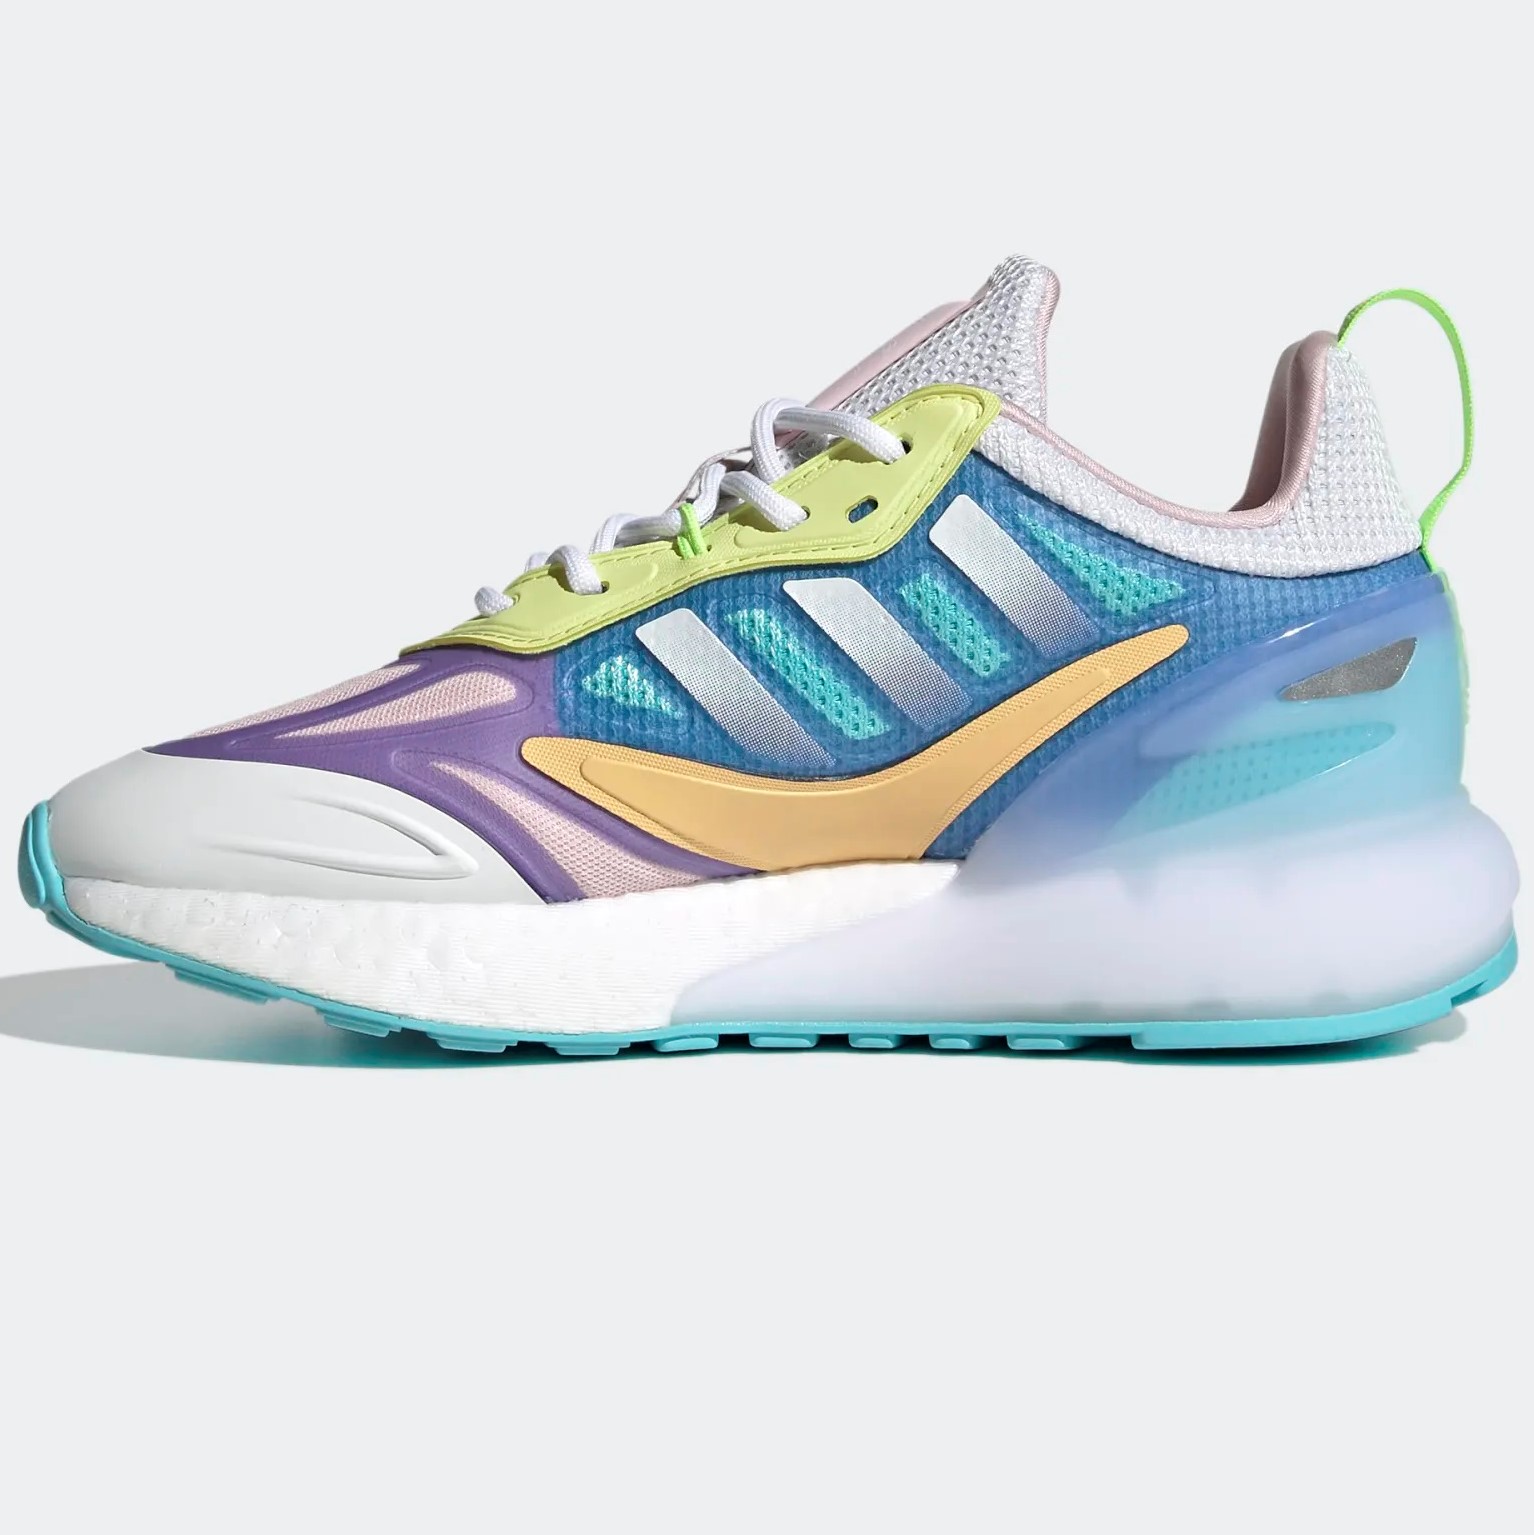 GIÀY THỂ THAO ADIDAS ZX 2K BOOST 2.0 5